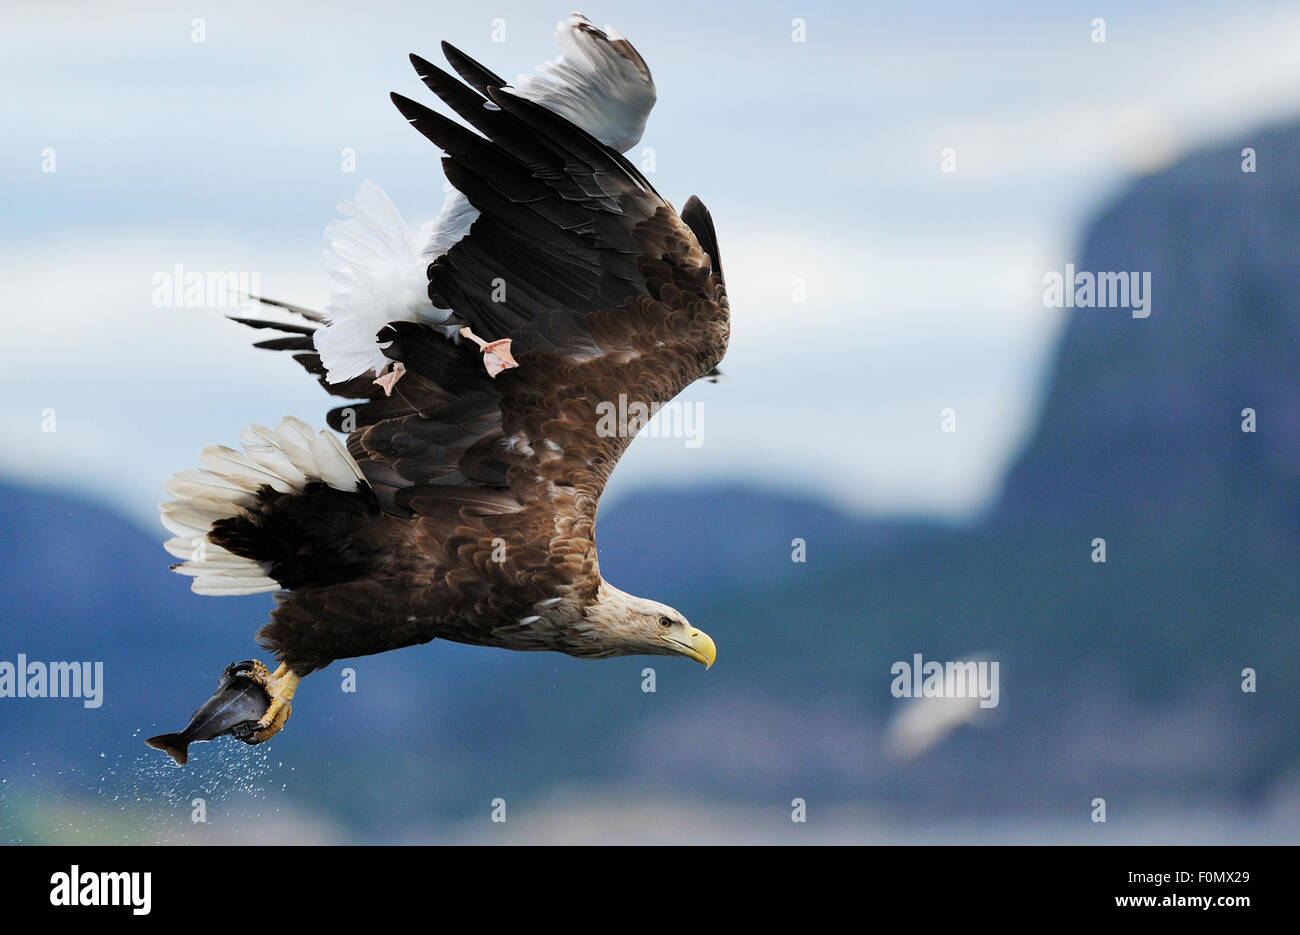 White tailed sea eagle (Haliaeetus albicilla) carrying fish with a Greater black backed gull (Larus marinus) flying above it with feet caught in the eagle's wing, Flatanger, Nord Trøndelag, Norway, August 2008 UNAVAILABLE FOR COMMERCIAL USE WITHOUT PRIOR Stock Photo